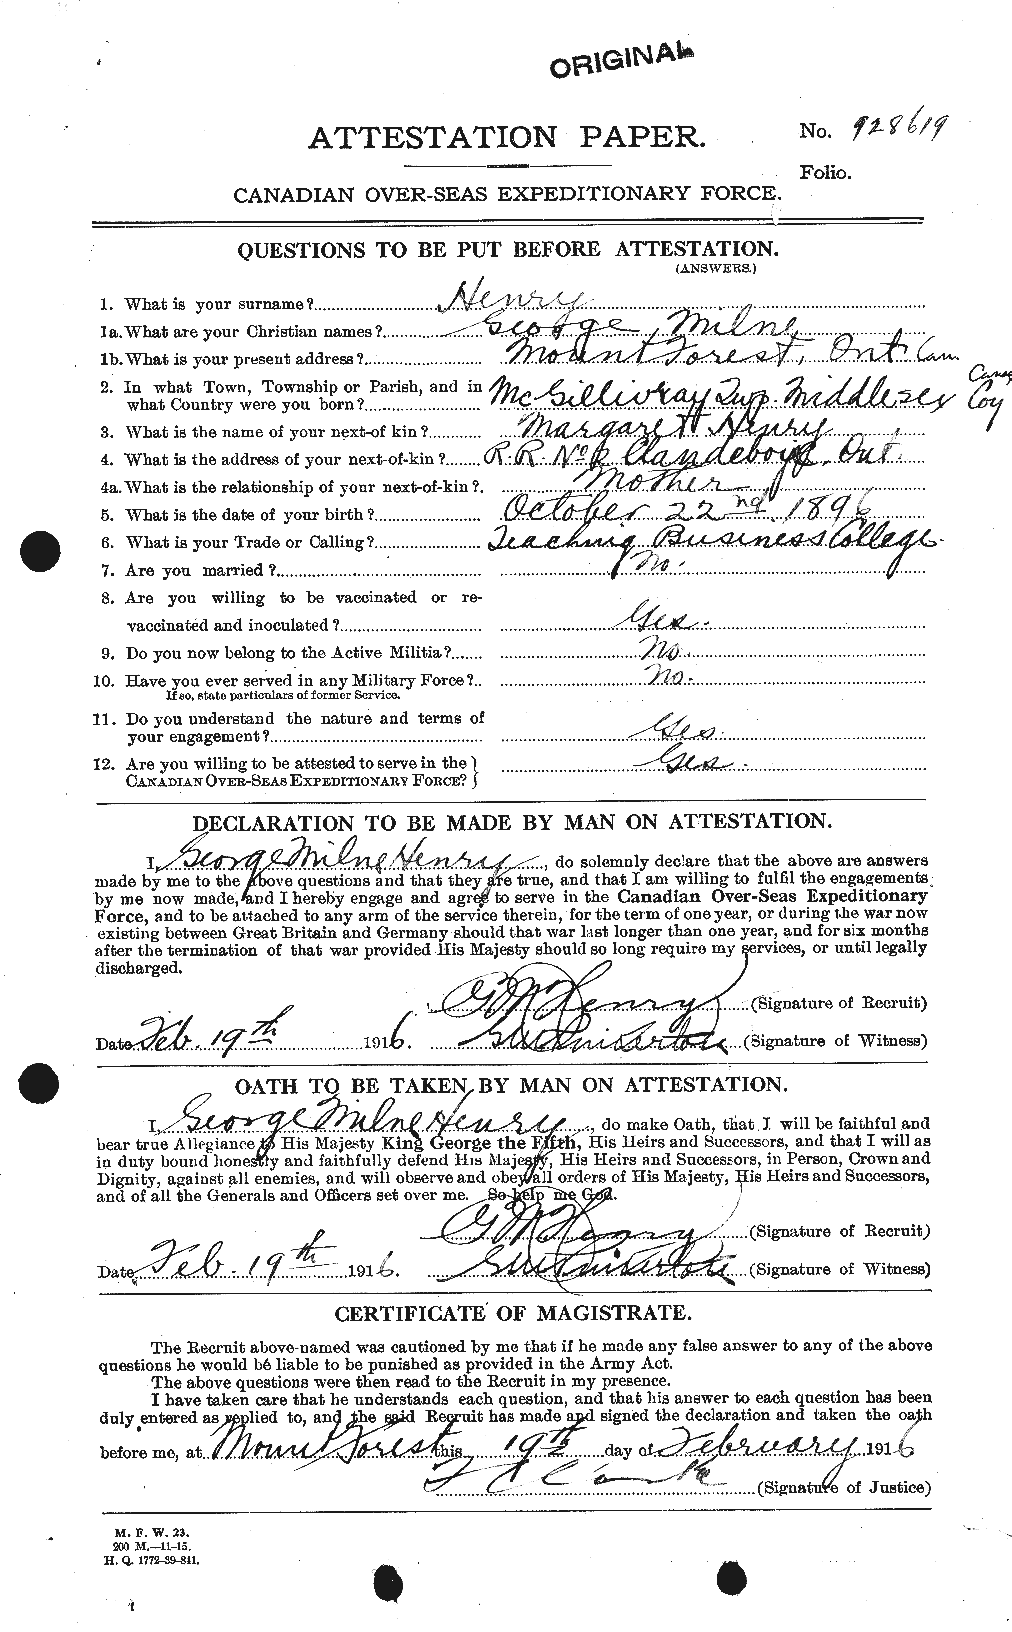 Personnel Records of the First World War - CEF 392879a